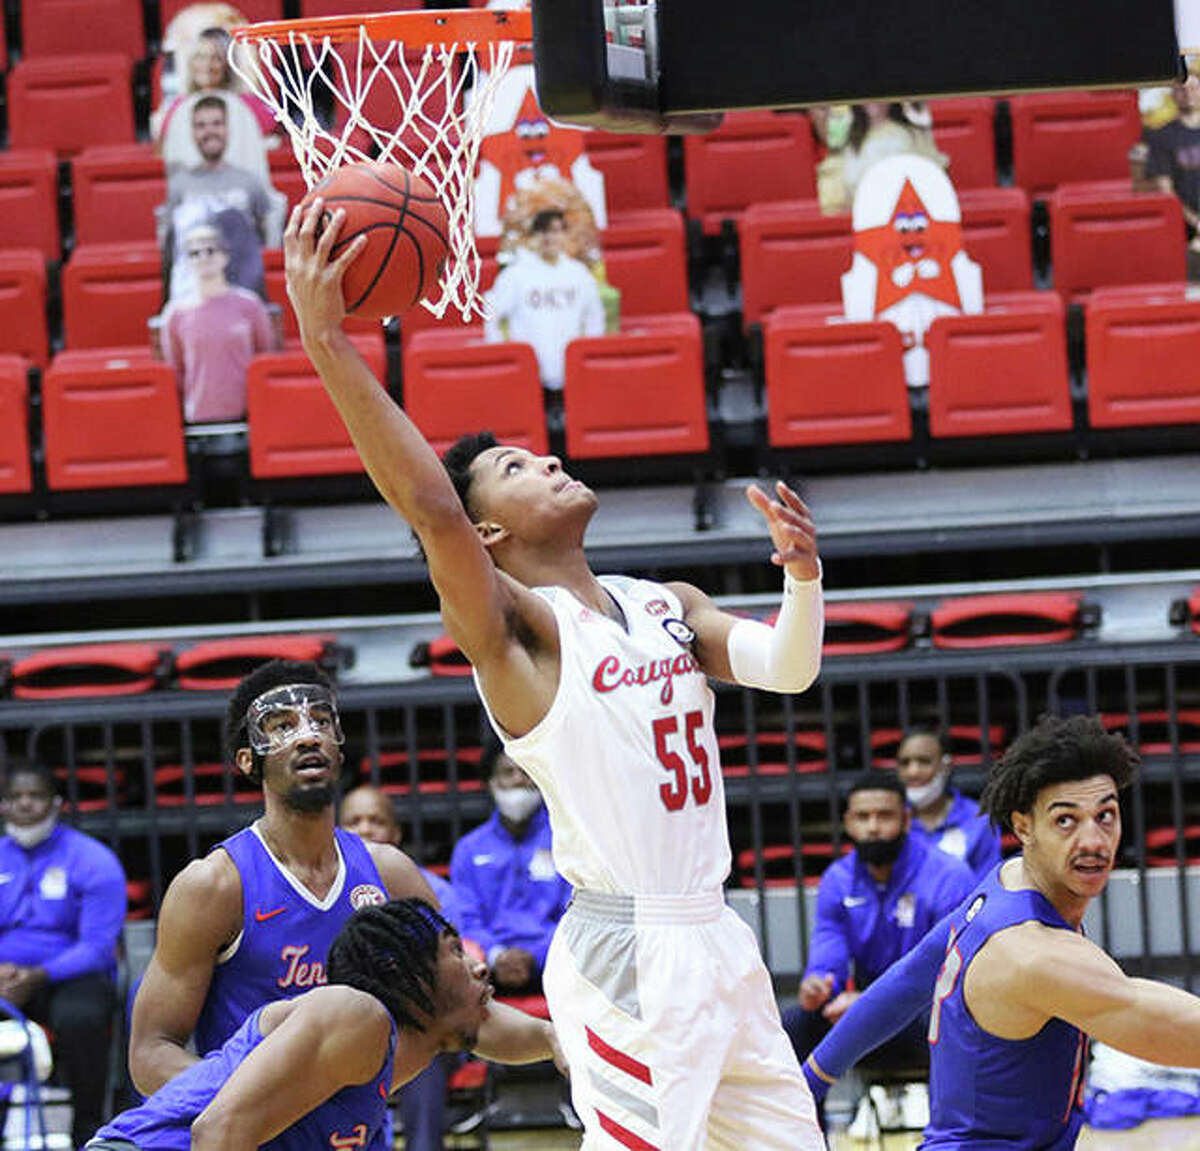 SIUE’s Lamar Wright (55) goes up to score in a game against Tennessee State last season at First Community Arena in Edwardsville.